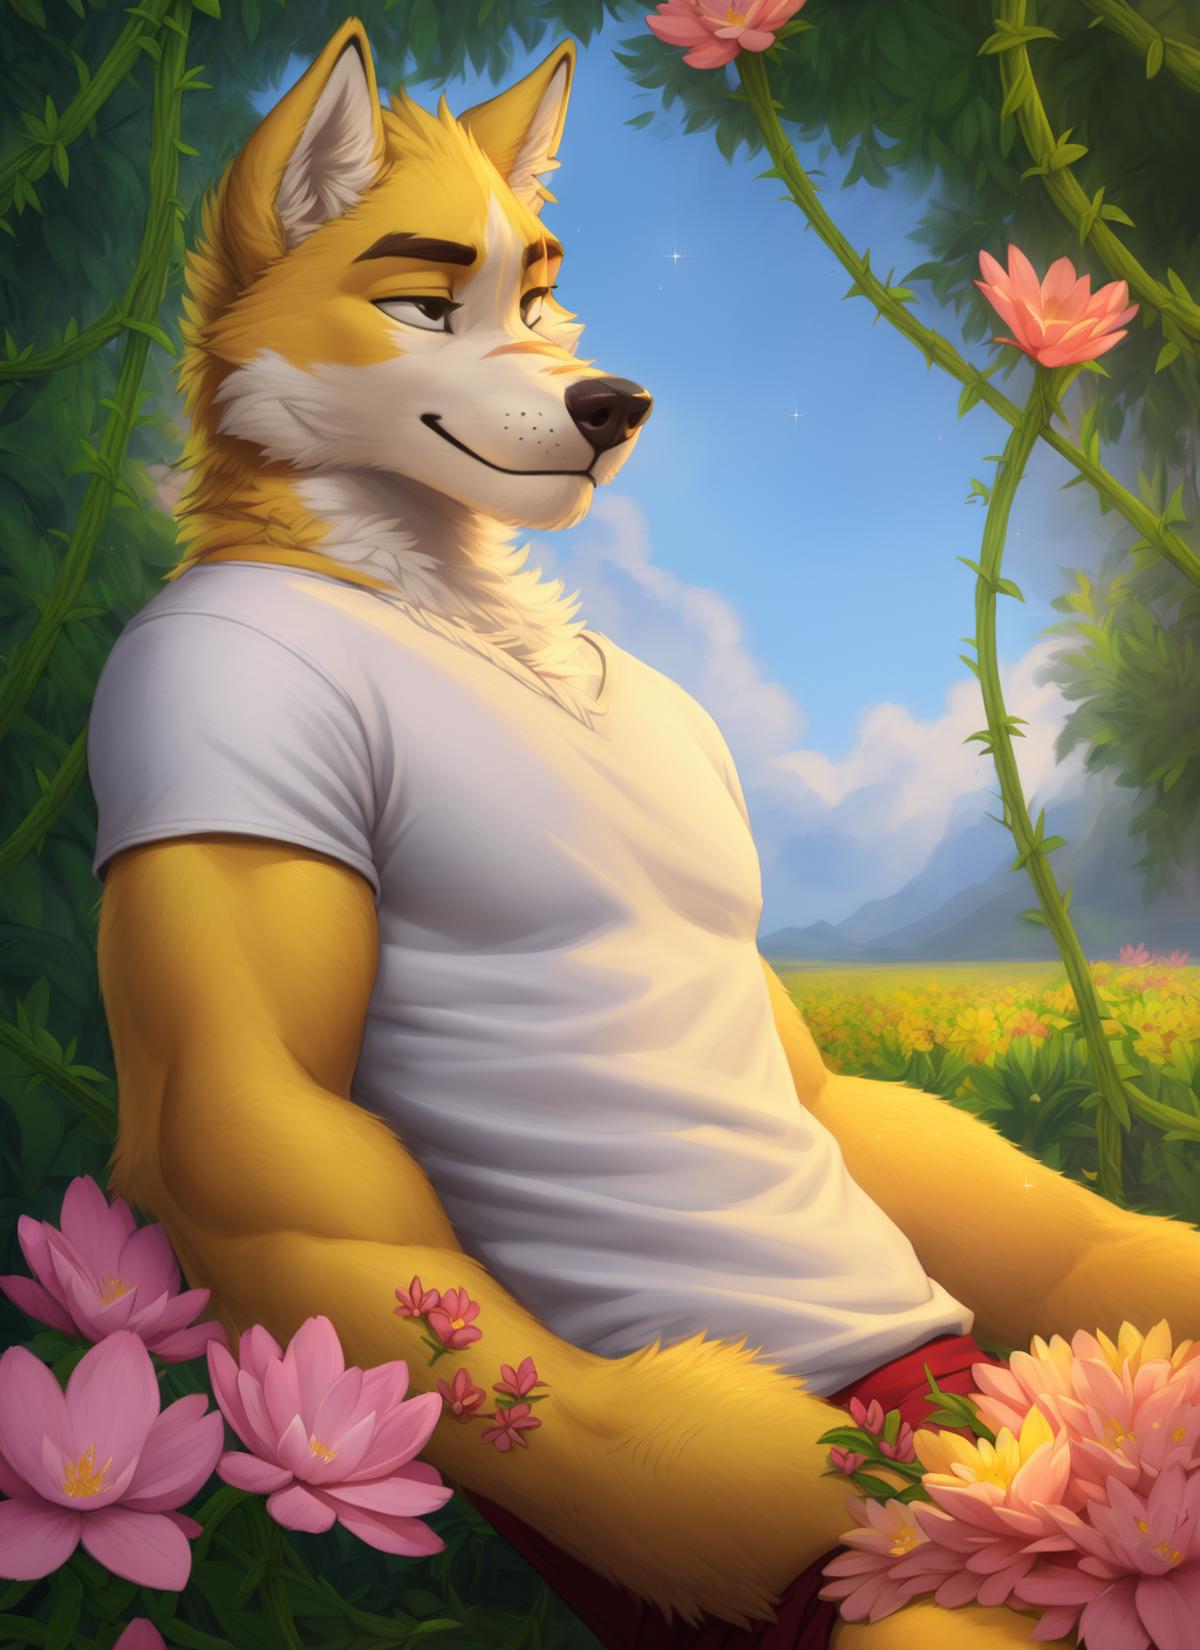 Cooper - Remember The Flowers image by Orion_12